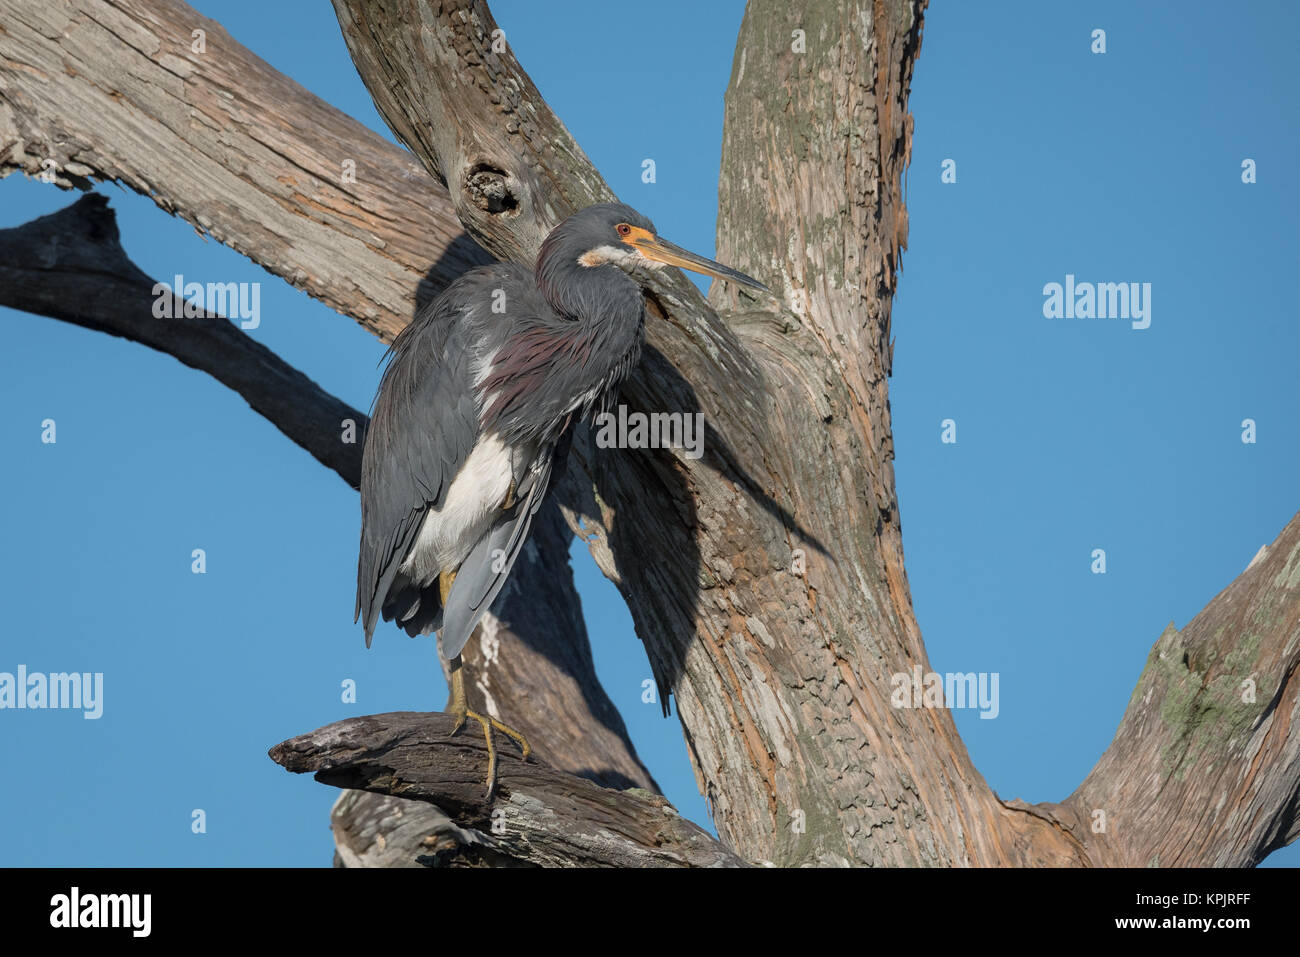 Tricolor Heron in an old tree Stock Photo